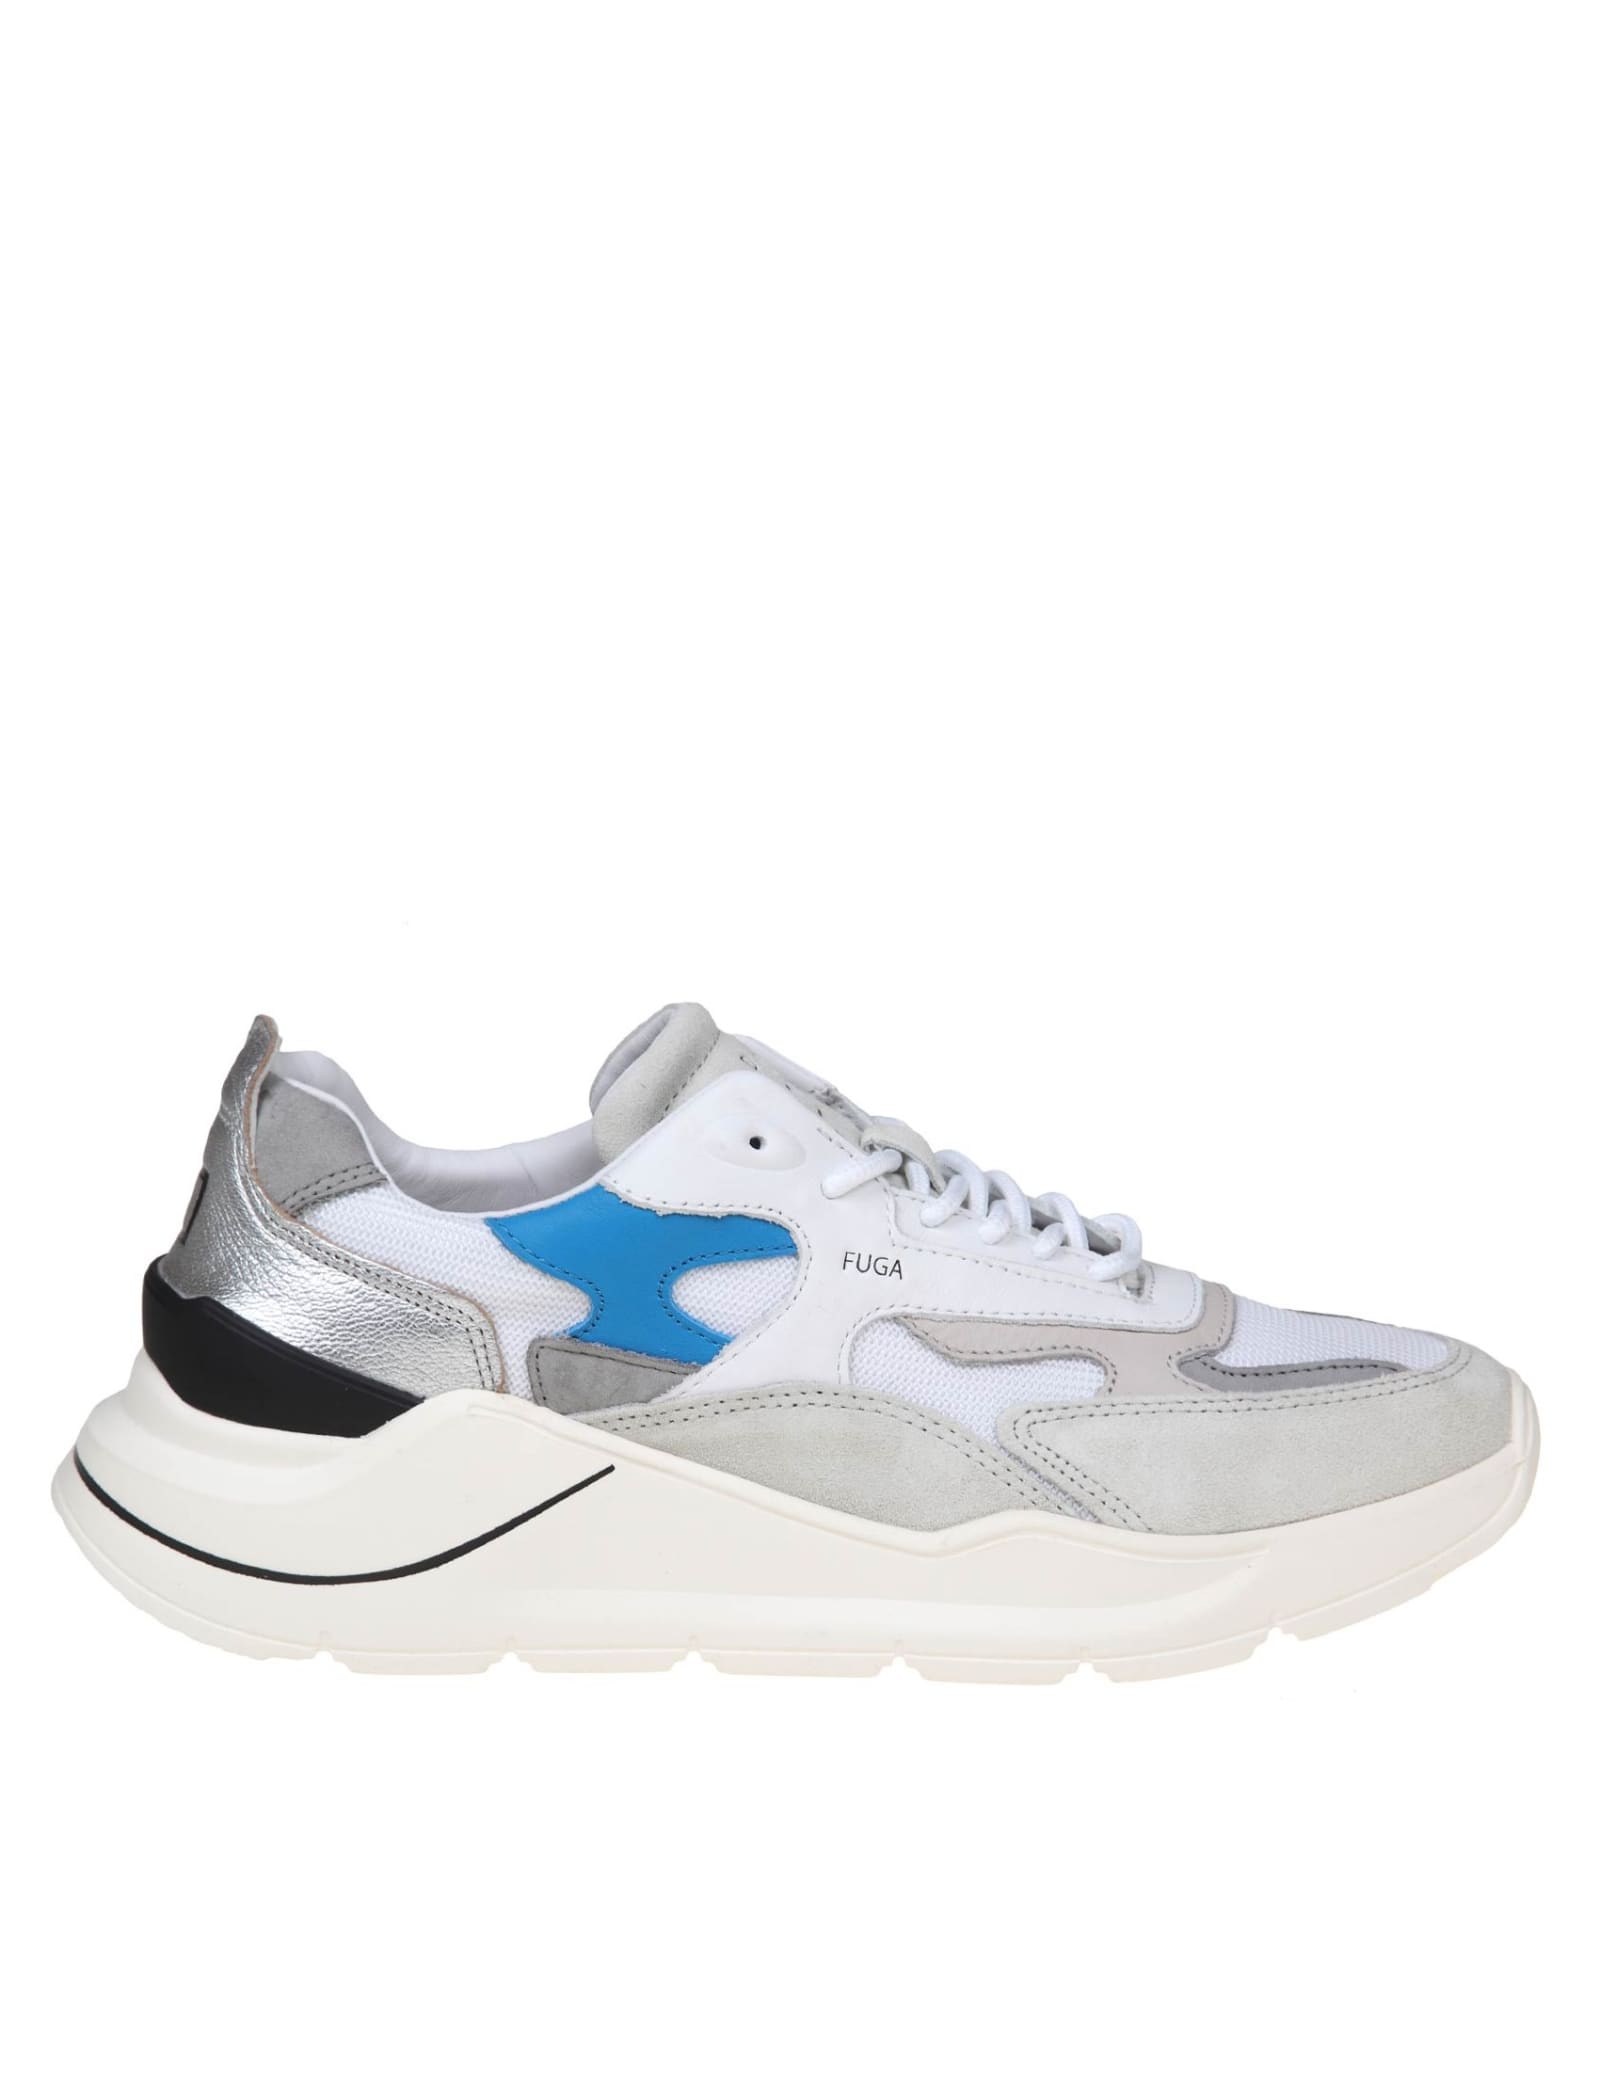 DATE FUGA SNEAKERS IN WHITE/SILVER LEATHER AND FABRIC